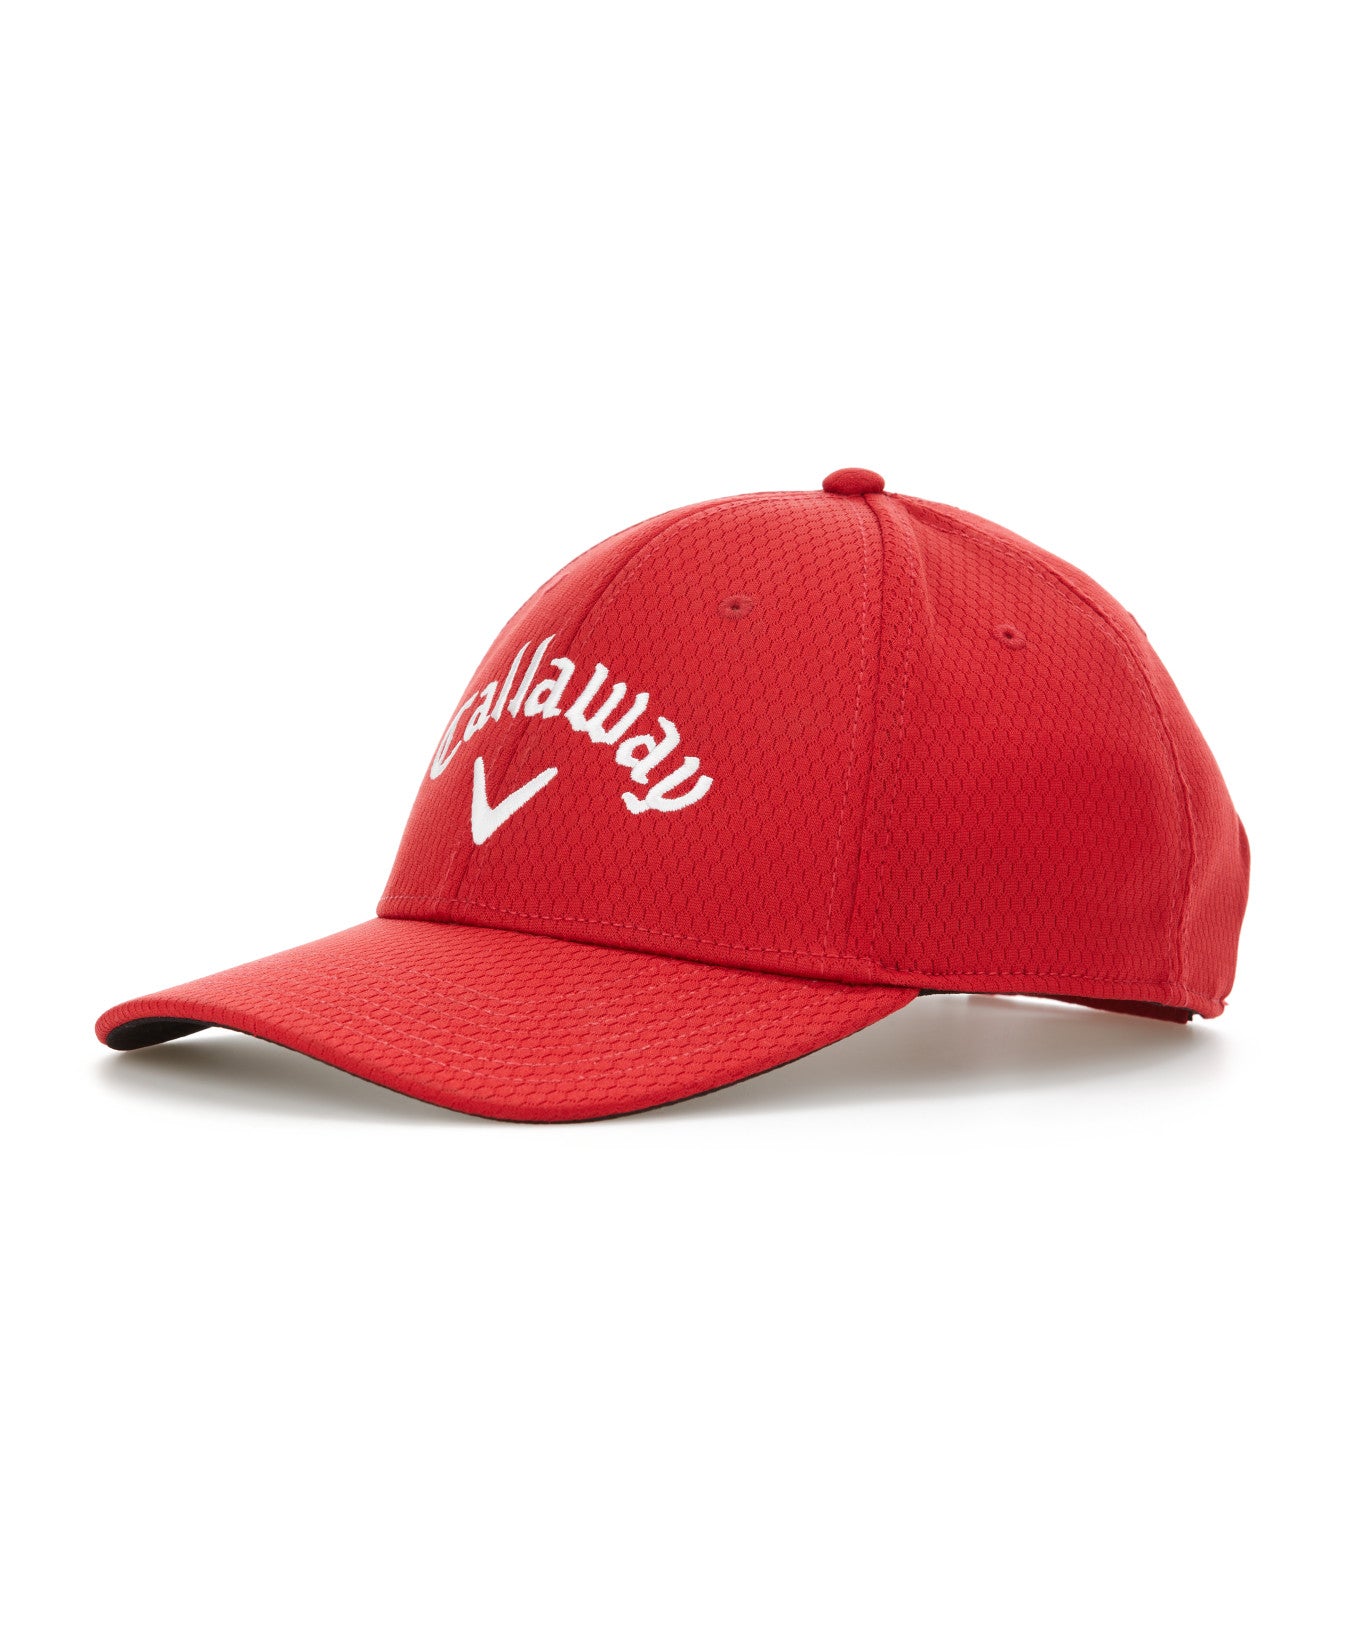 View Side Crested Structured Golf Hat In Red information